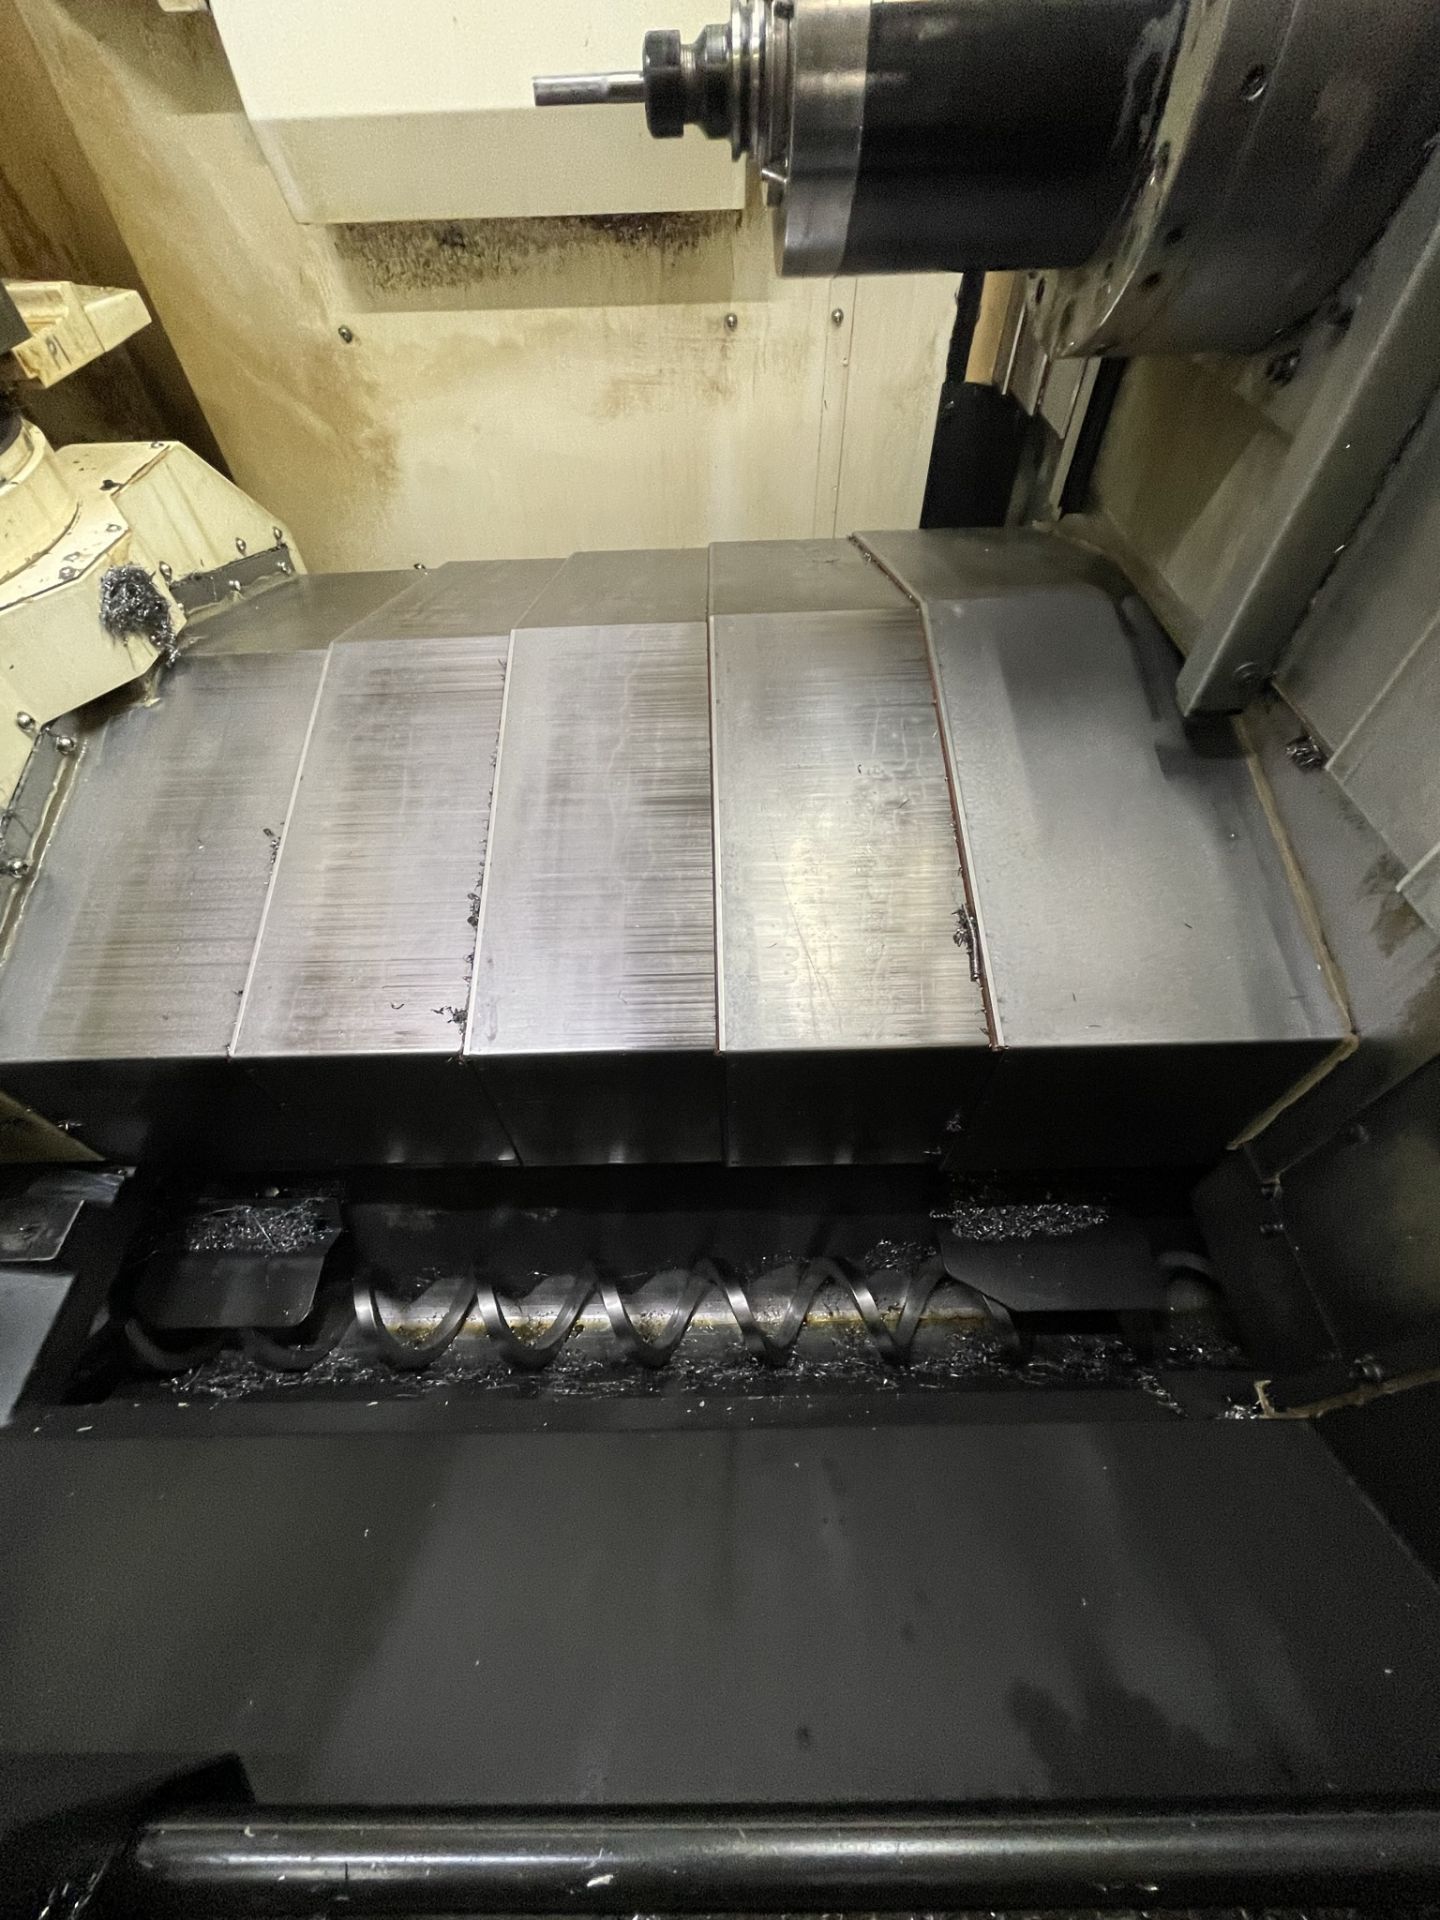 2013 Hyundai WIA HS4000i 4-Axis Horizontal Machining Center with Pallet Changer *1643 Cutting Hours* - Image 6 of 25